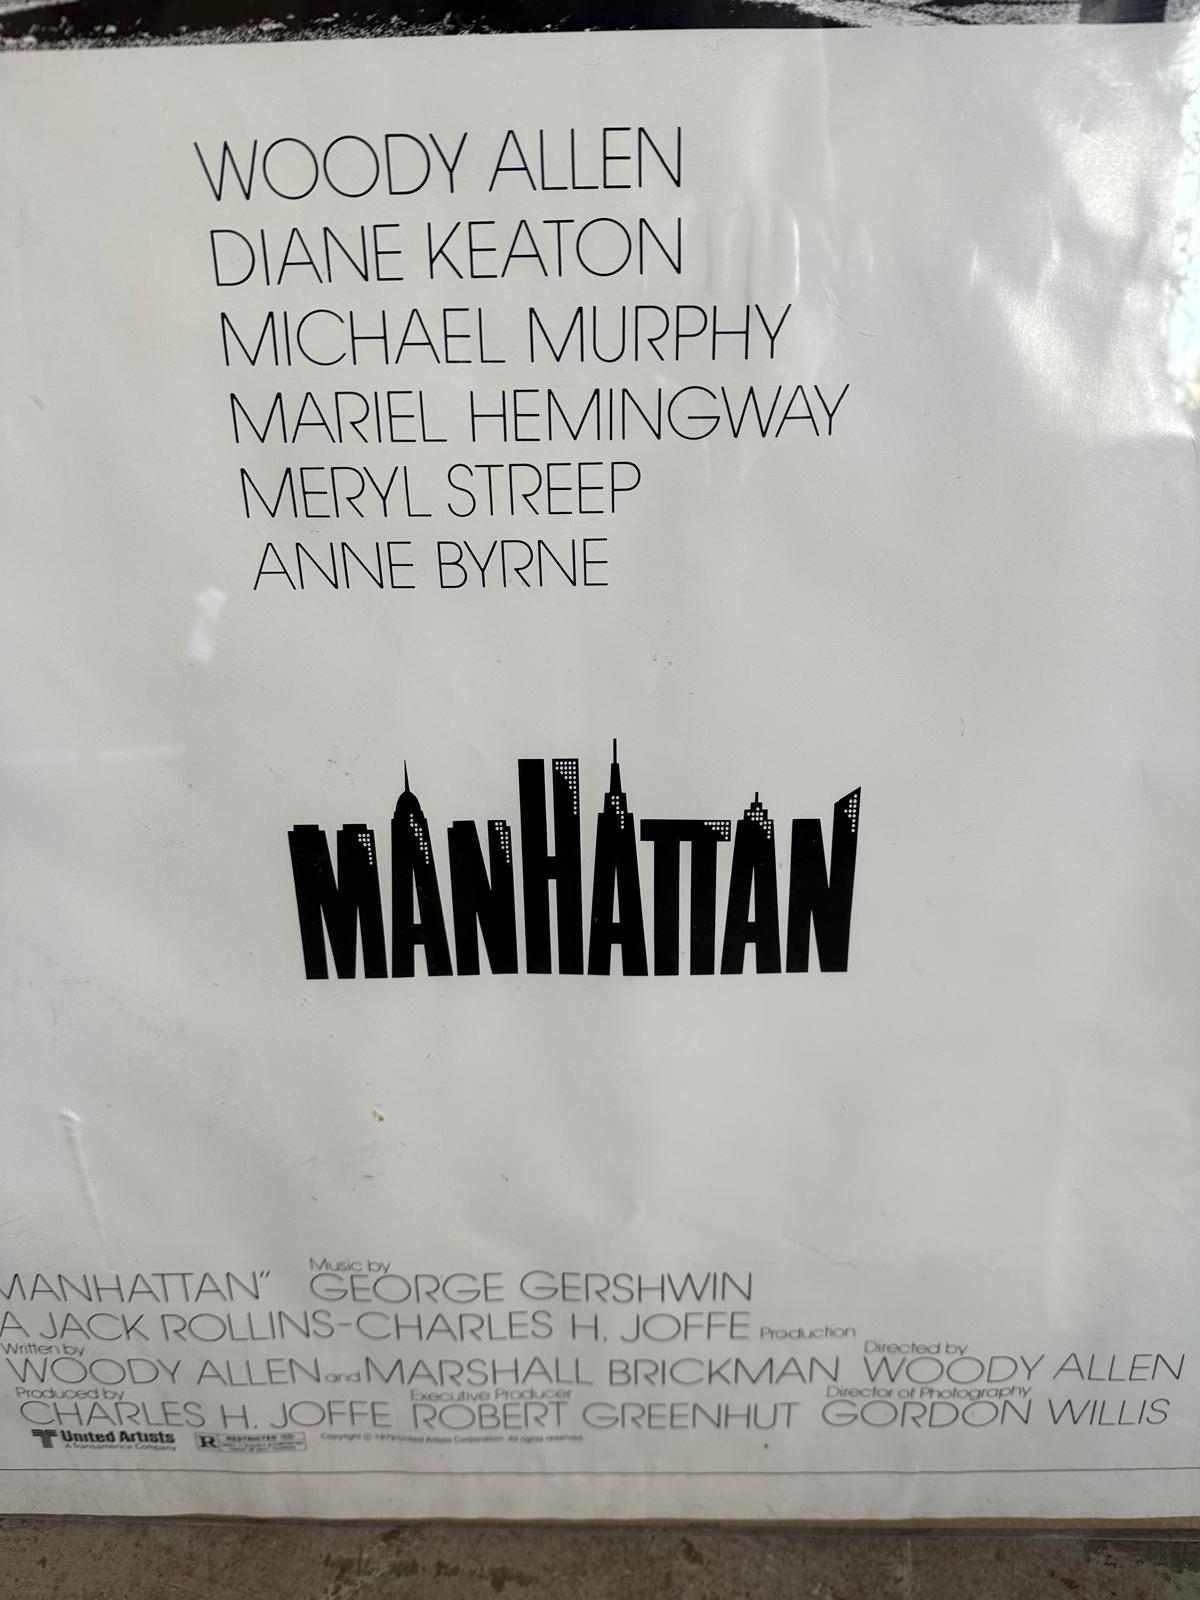 A vintage poster from the Woody Allen film Manhattan - Image 4 of 4